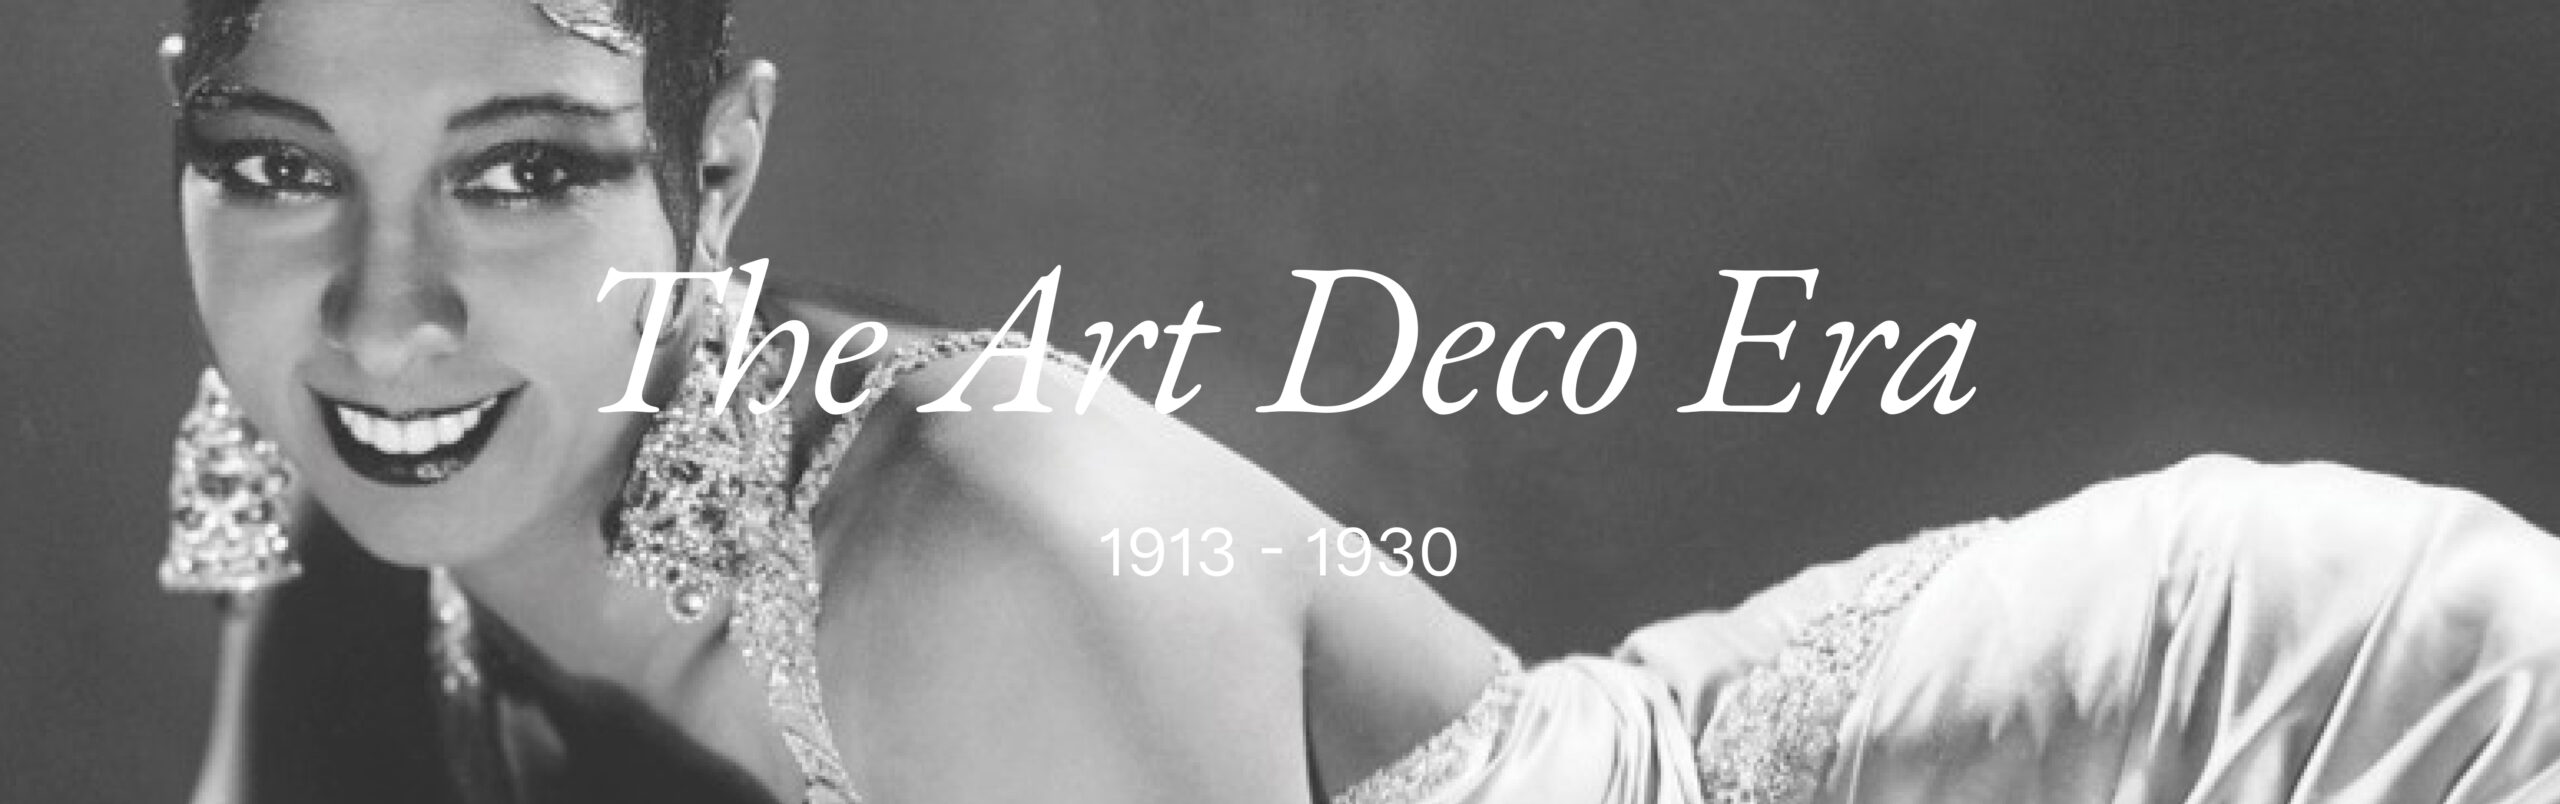 Photo background of Josephine Baker circa 1920s. White text set on top of photo that reads "The Art Deco Era" followed by "1913 - 1930"